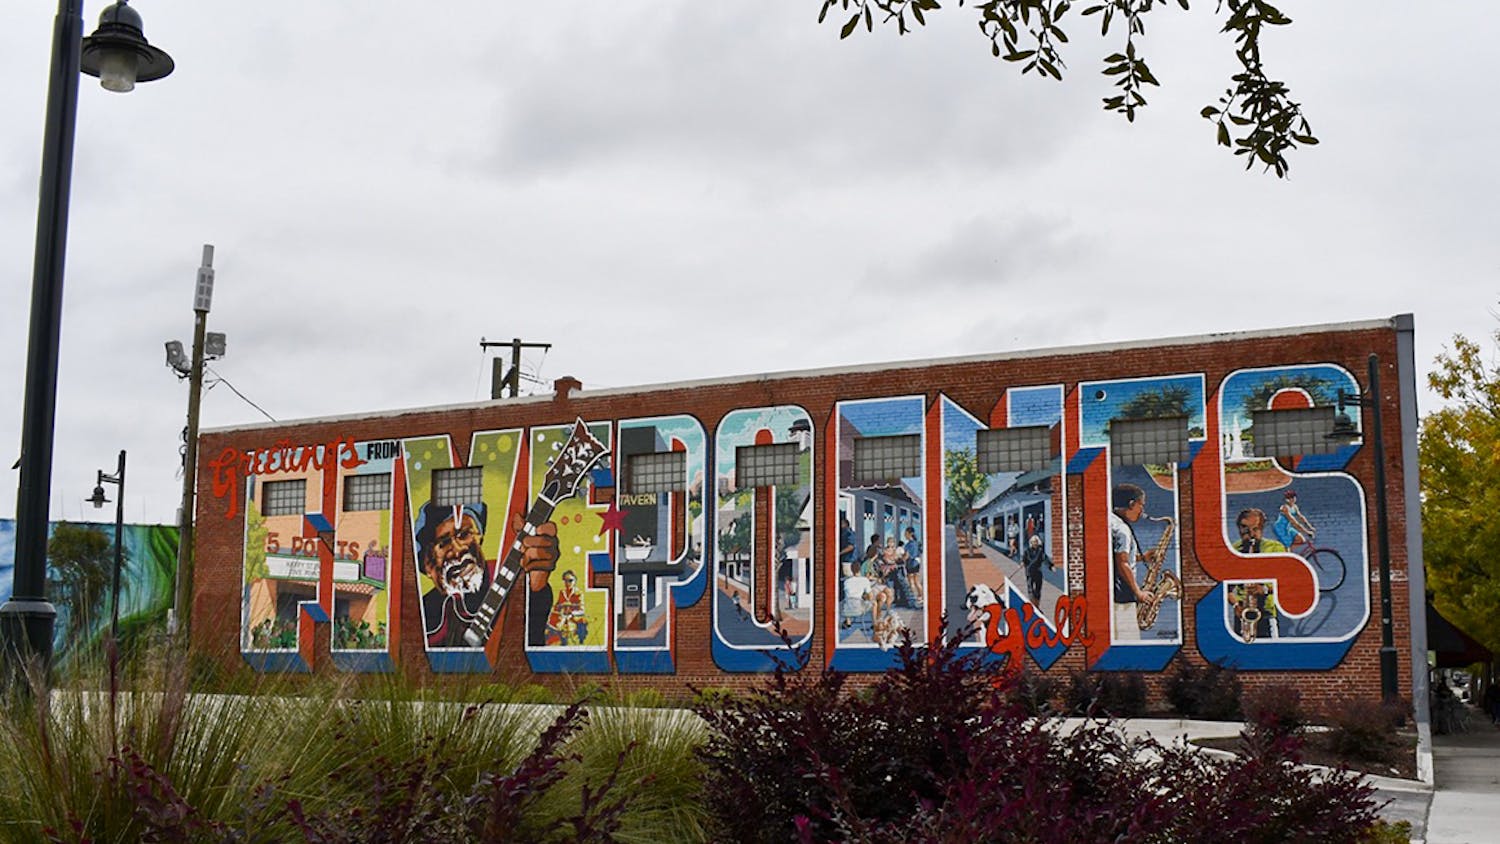 "Greetings from Five Points" mural viewed from the Five Points Fountain.